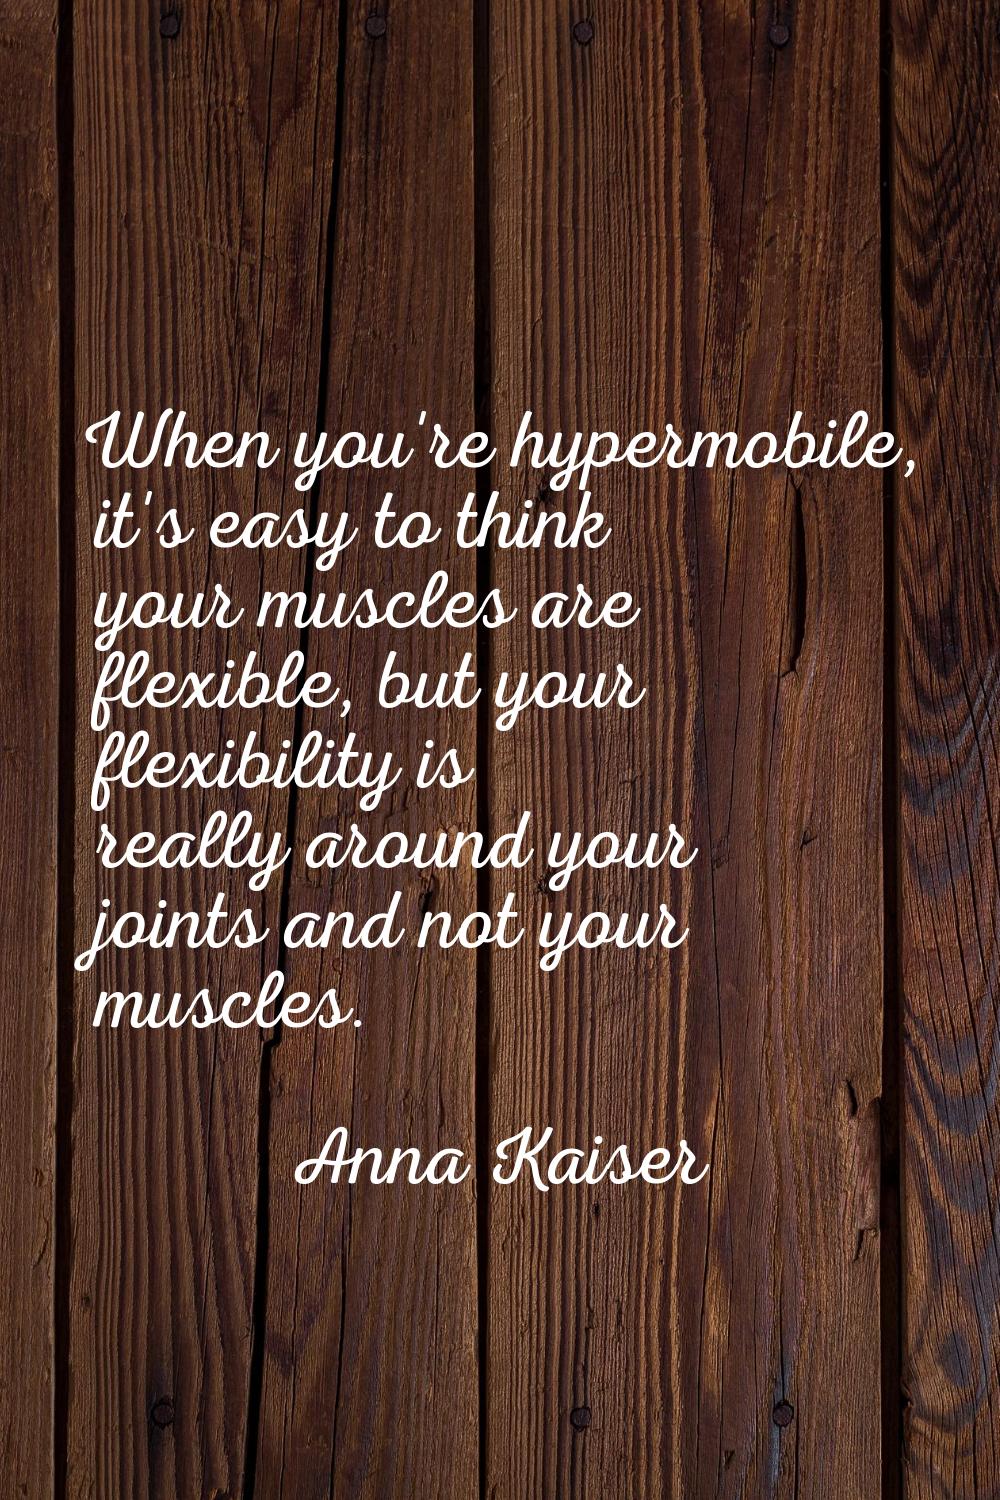 When you're hypermobile, it's easy to think your muscles are flexible, but your flexibility is real